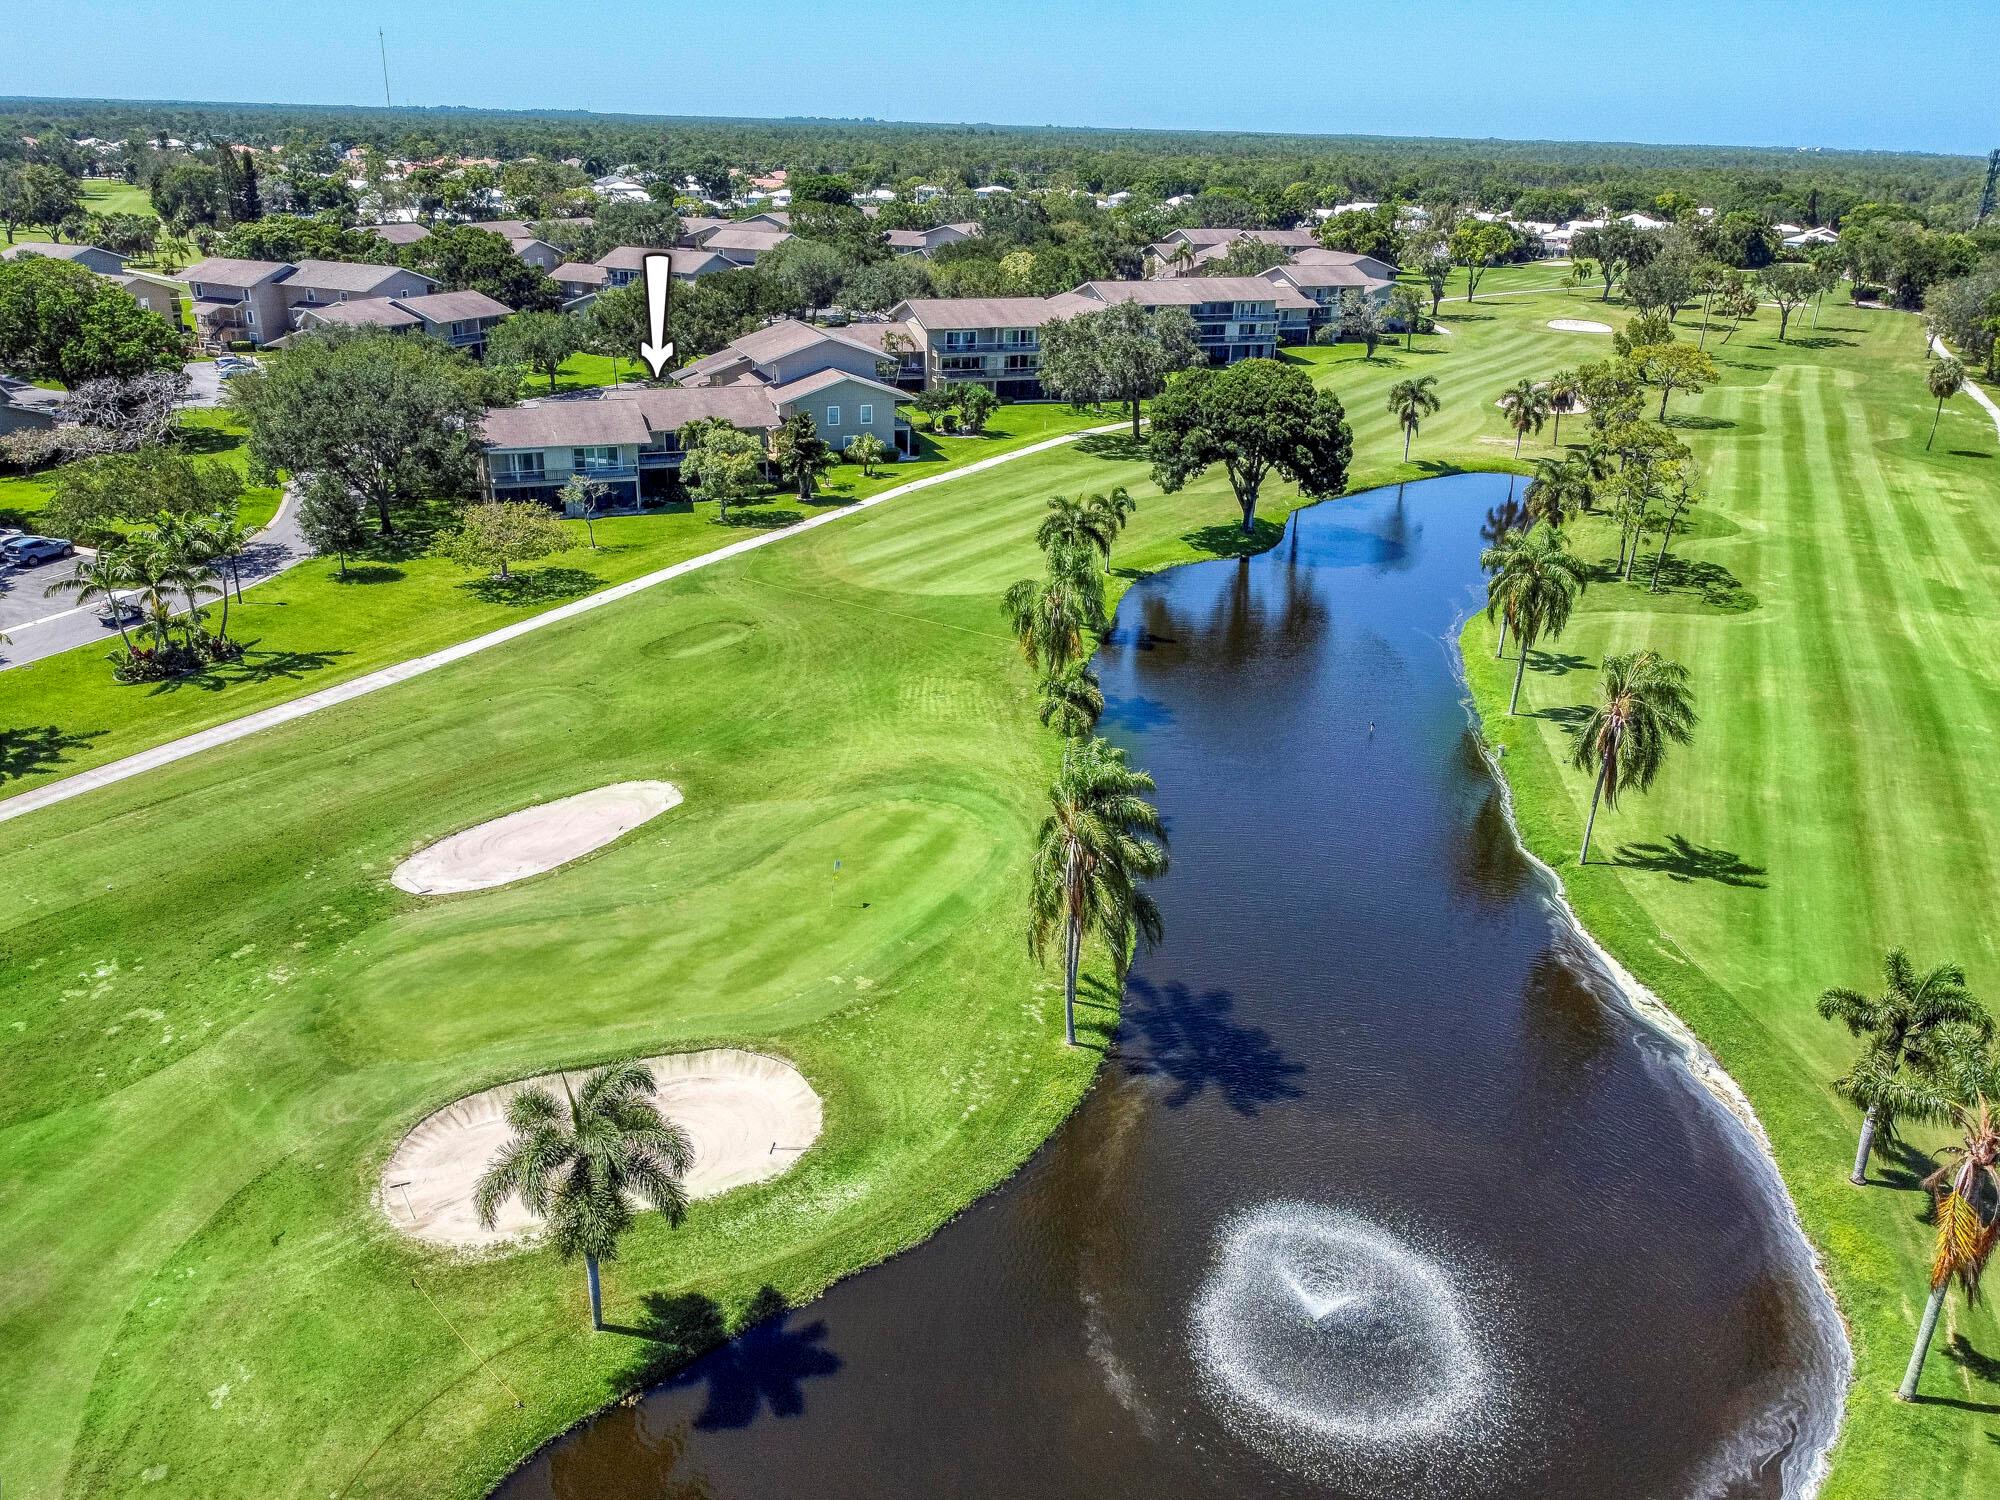 Priced to Sell! Best SE lake & fairway views are yours in this 2/2.5 tropical getaway! Located in beautiful Riverbend Country Club where every owner enjoys Har-Tru tennis courts, pickleball, pool, golf on a Fazio designed 18, plus a charming clubhouse and riverside pool deck where you can bask in the warm Florida sun all day. This special home is perfectly positioned for balmy tropical breezes and beautiful light! Your dual porches are ideal for experiencing the wonders of nature with dreamy vistas of a rising sun & moon to the east and pastel clouds at sunset to melt your cares away. Every day is a tropical holiday in this charming cottage community. Very quiet, scenic area. Located in the Village of Tequesta & Jupiter - close to everything. SoFla's best value hidden gem! Riverbend is the perfect year-round home or tropical winter getaway with soothing East West breezes. Whether you play golf or just enjoy daily walks, you'll enjoy the friendly atmosphere and quiet natural scenery along the river. Every owner receives a family membership including a terrific Fazio 18-hole course, driving range, certified golf teaching pro and fully equipped pro shop and Har-tru tennis and pickleball courts. Lounge and pool area includes 2 heated pools for adults and children, beautifully situated along the quiet &amp; serene Loxahatchee River. The Club hosts various outstanding golfing and tennis events, holiday socials, book club, pool parties and festive gatherings throughout the year. 24 hrs. man-gated and guarded community, surrounded by upscale residential homes and communities. In close proximity to Florida's most beautiful beaches, great shopping &amp; dining, and just 30 minutes to the Palm Beach International Airport! Enjoy this Tequesta address with lower Martin County taxes. Financially stable association, on site office, water, sewer, cable, ext. maintenance, building insurance and reserves are included in COA fee. Intimate community size of just 311 condominiums on 100 acres. There is a Golf Maintenance fee of $680 per quarter. No golf equity required. We have a short video showcasing Riverbend available on request.